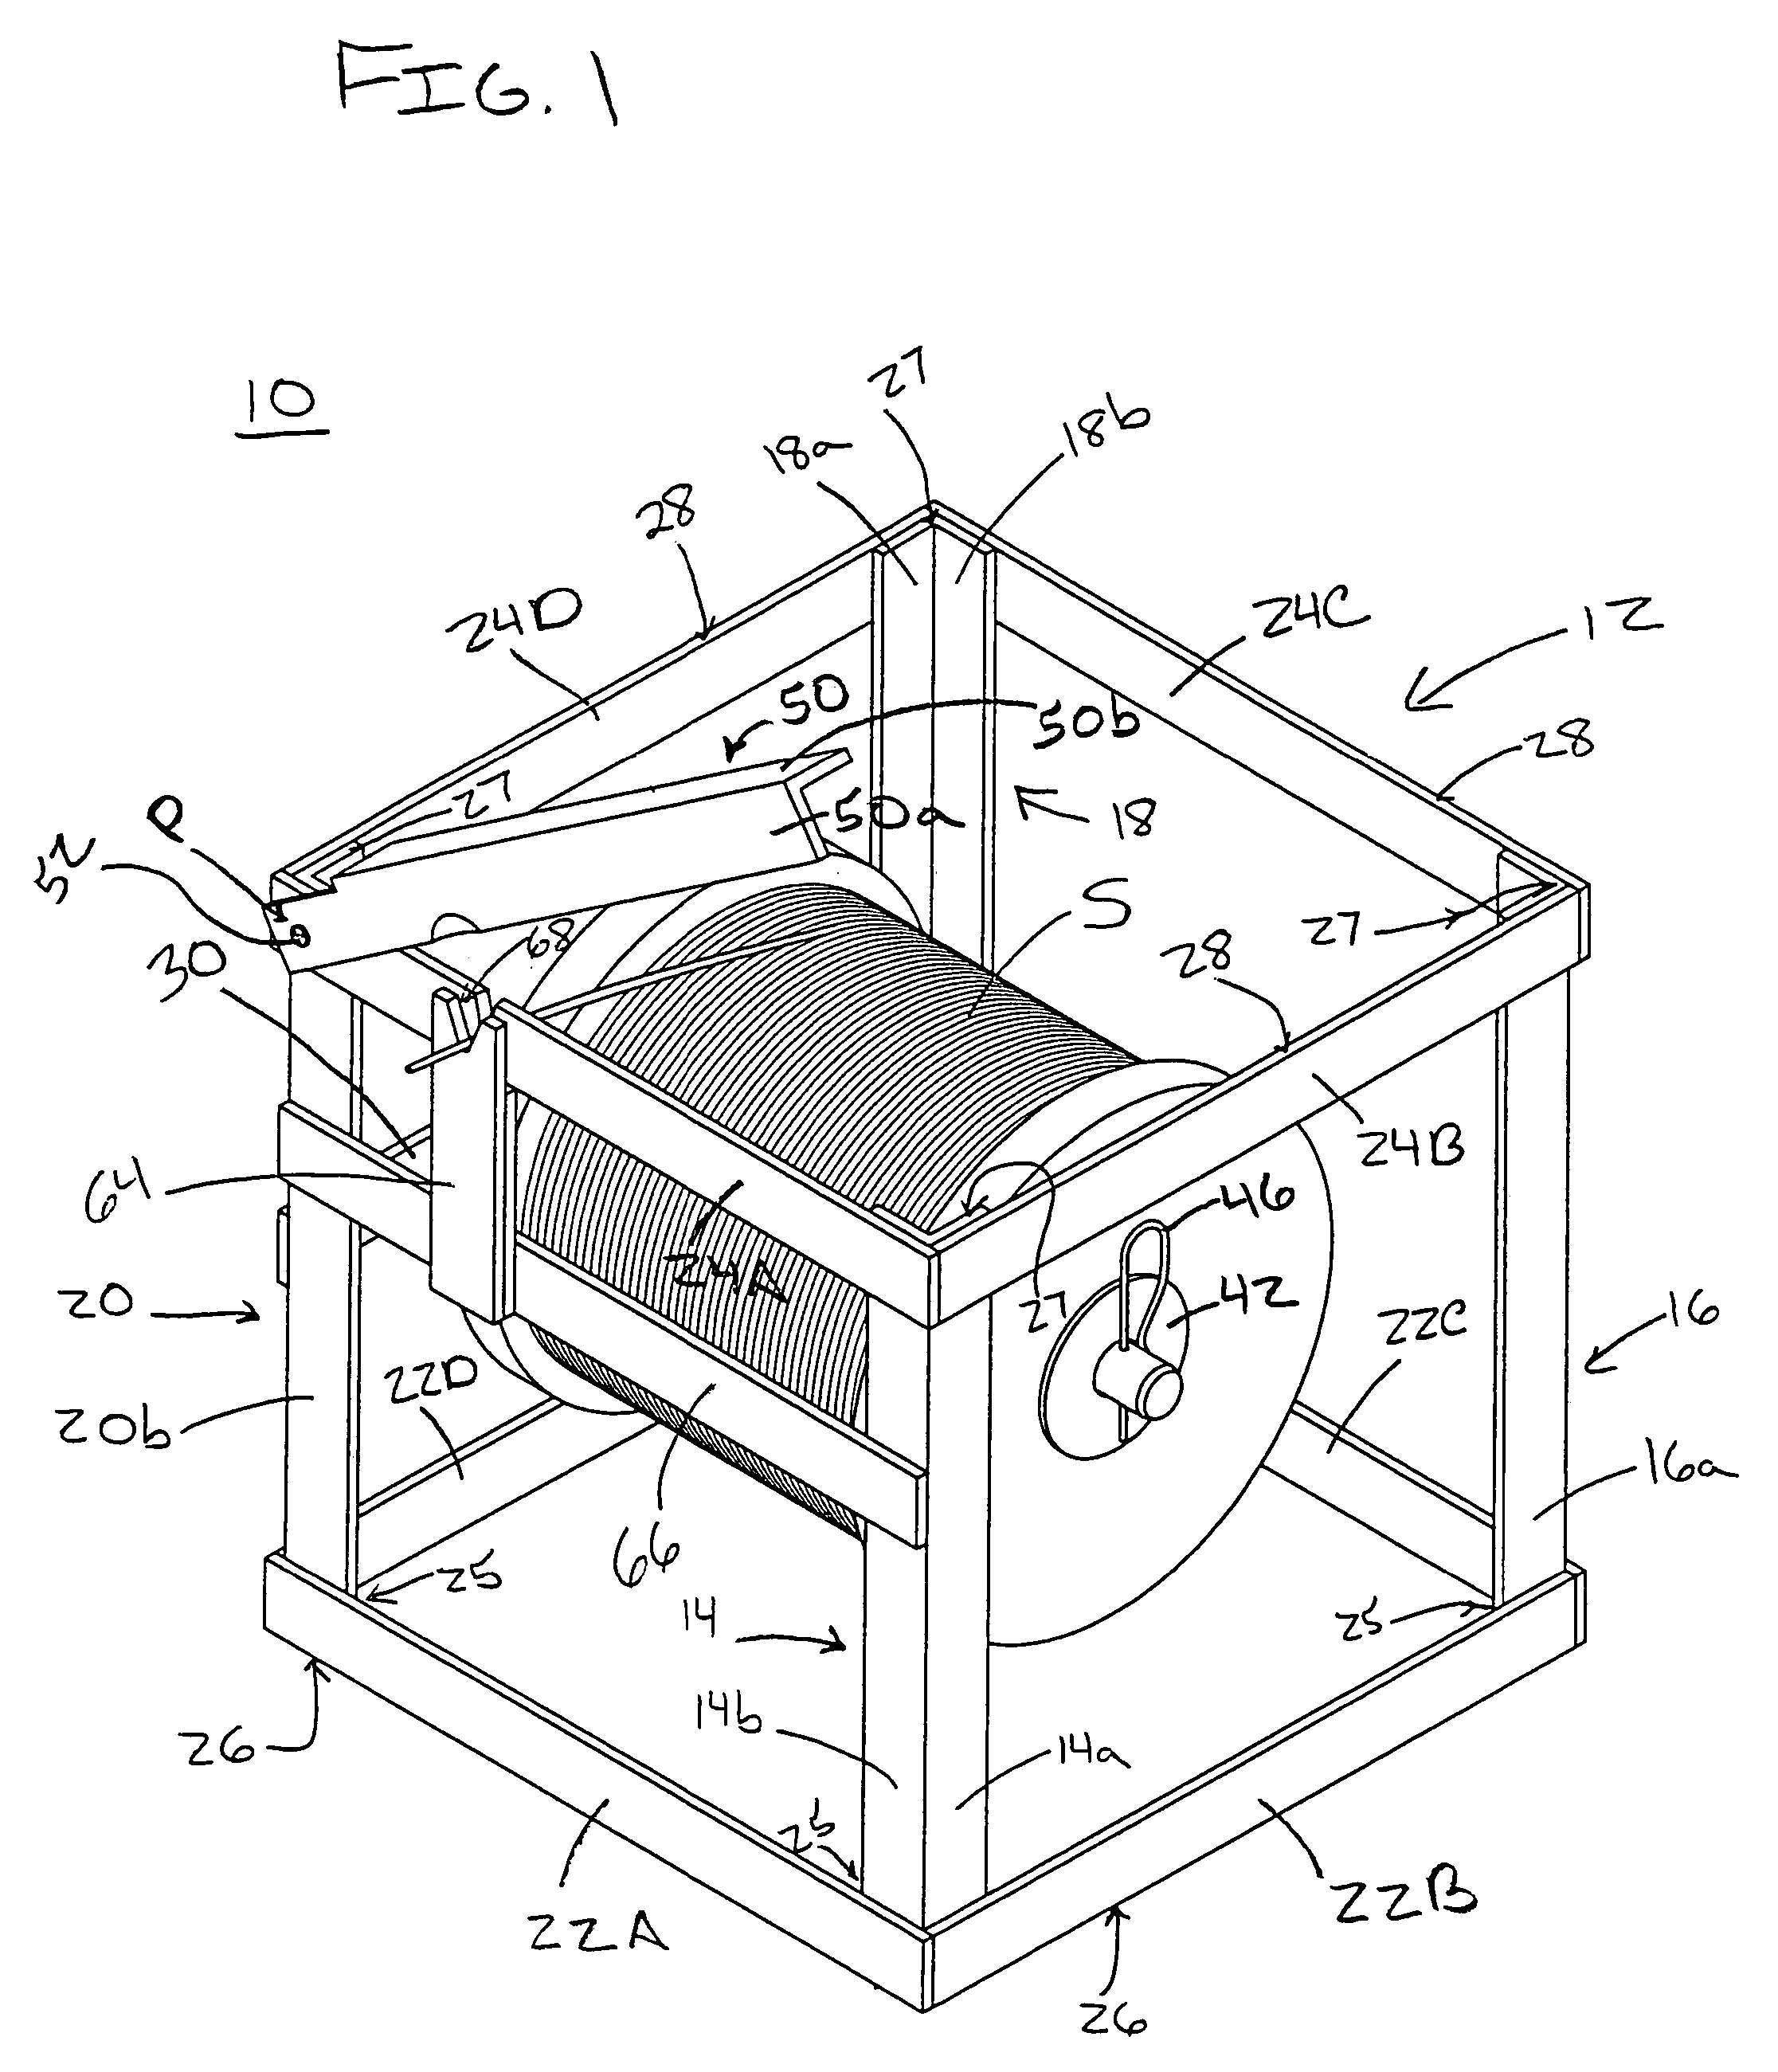 Protective spool dispenser and cutter